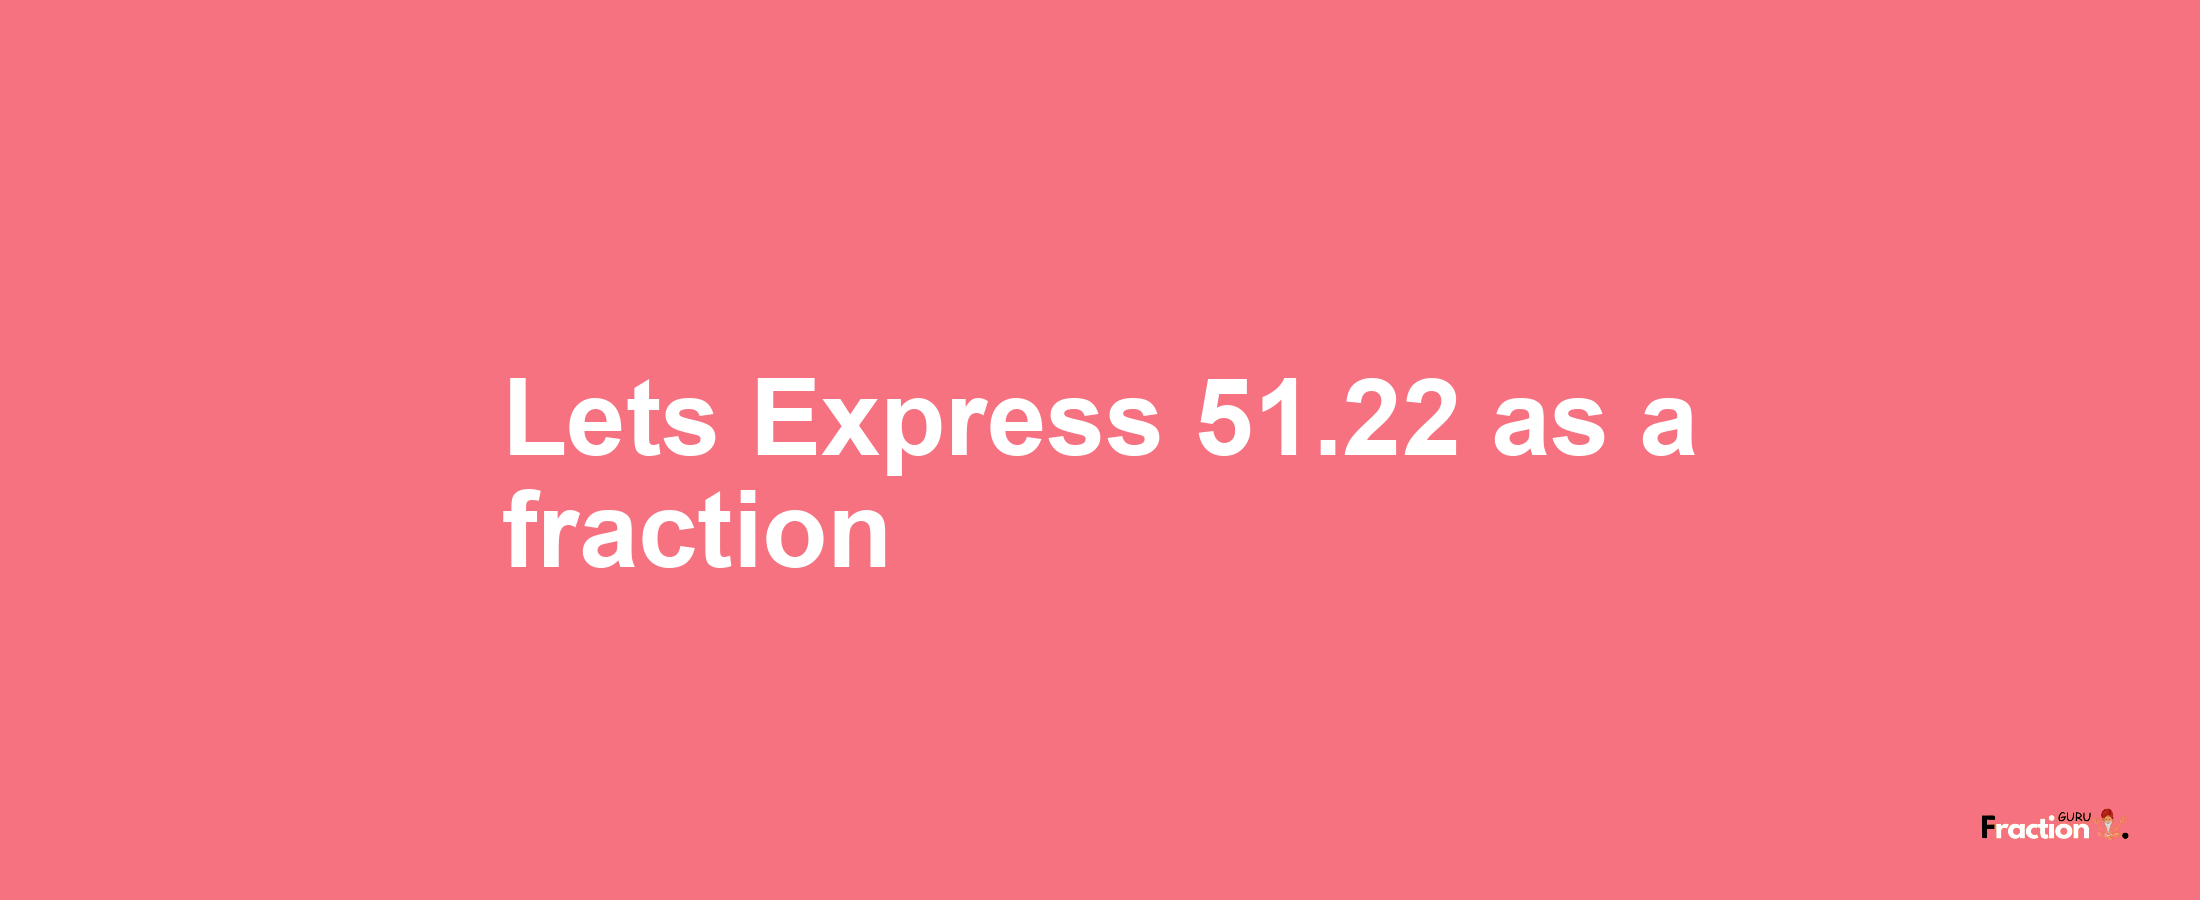 Lets Express 51.22 as afraction